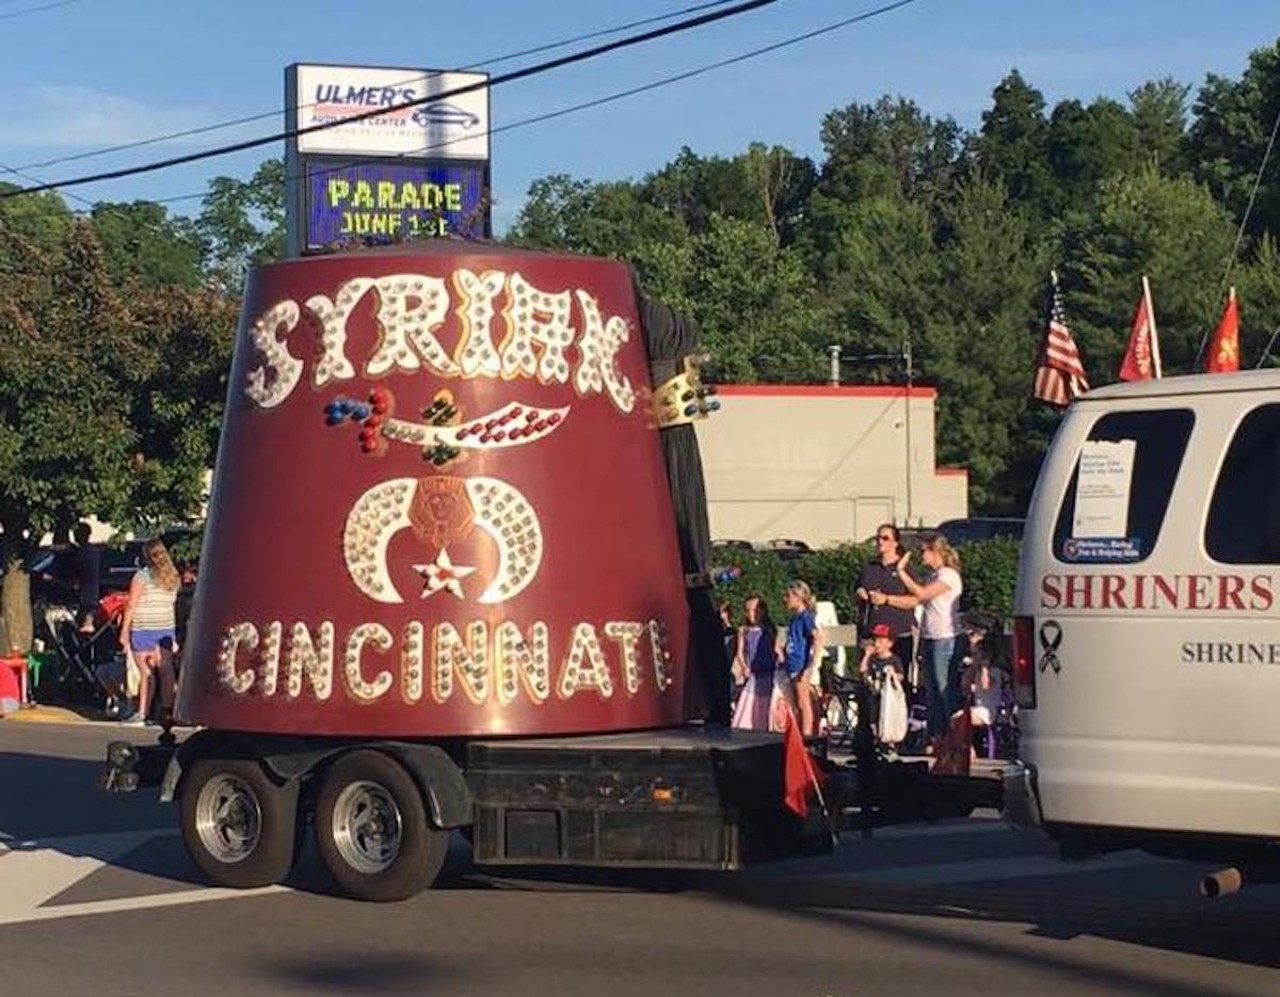 Cincinnati Shriners
9730 Reading Road, Evendale
Fish frys held every Friday from Feb. 16 to March 29 from 5-7 p.m. Dine-in and carryout are available.